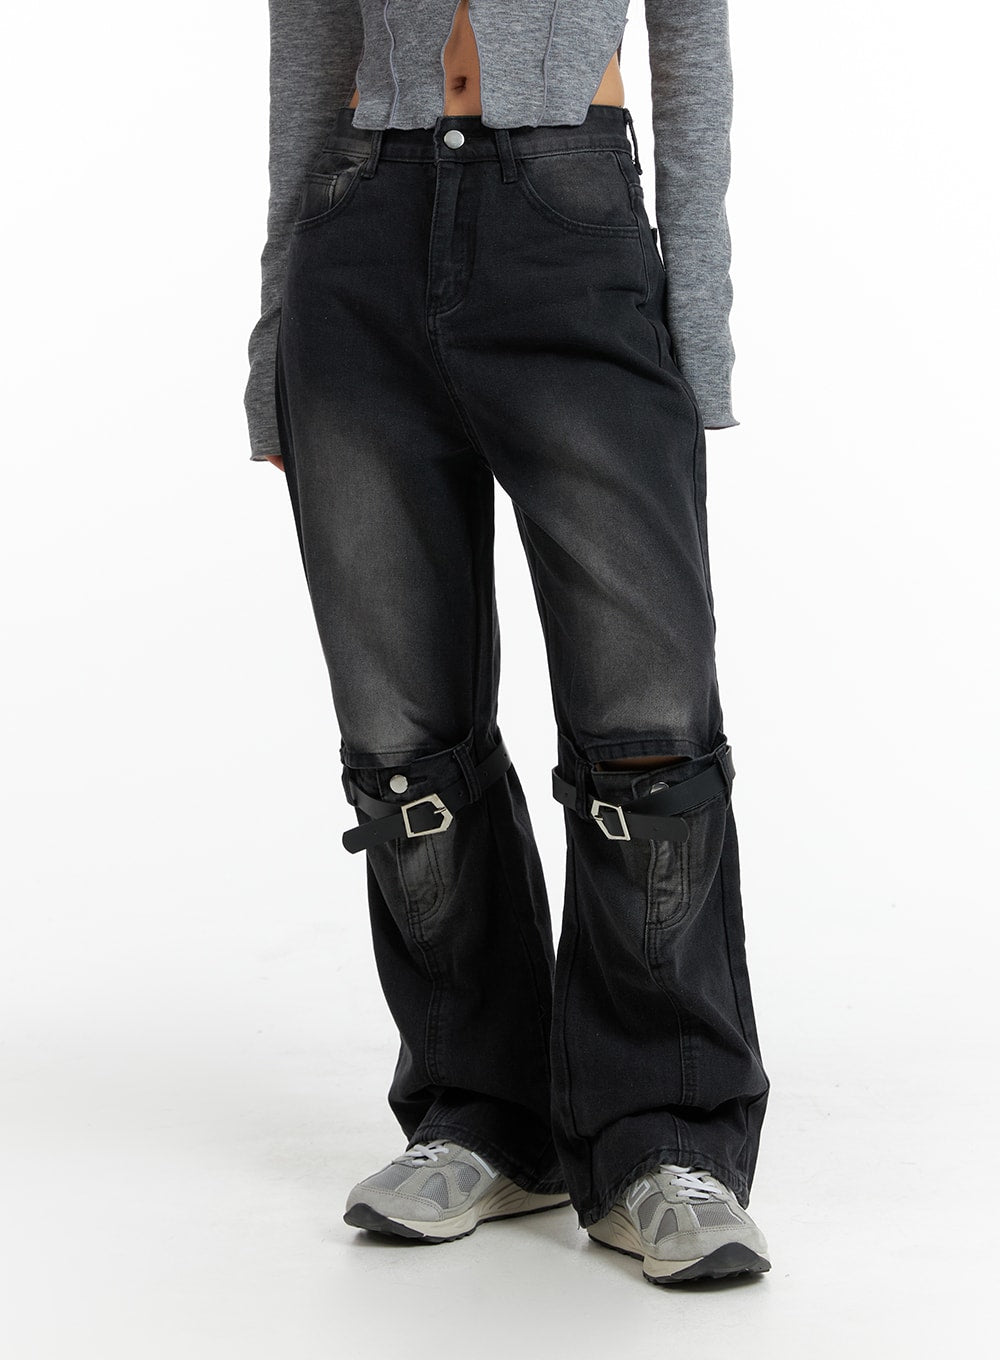 8 & 9 Clothing - Strapped Up Utility Jeans Royal Straps - Black / R...